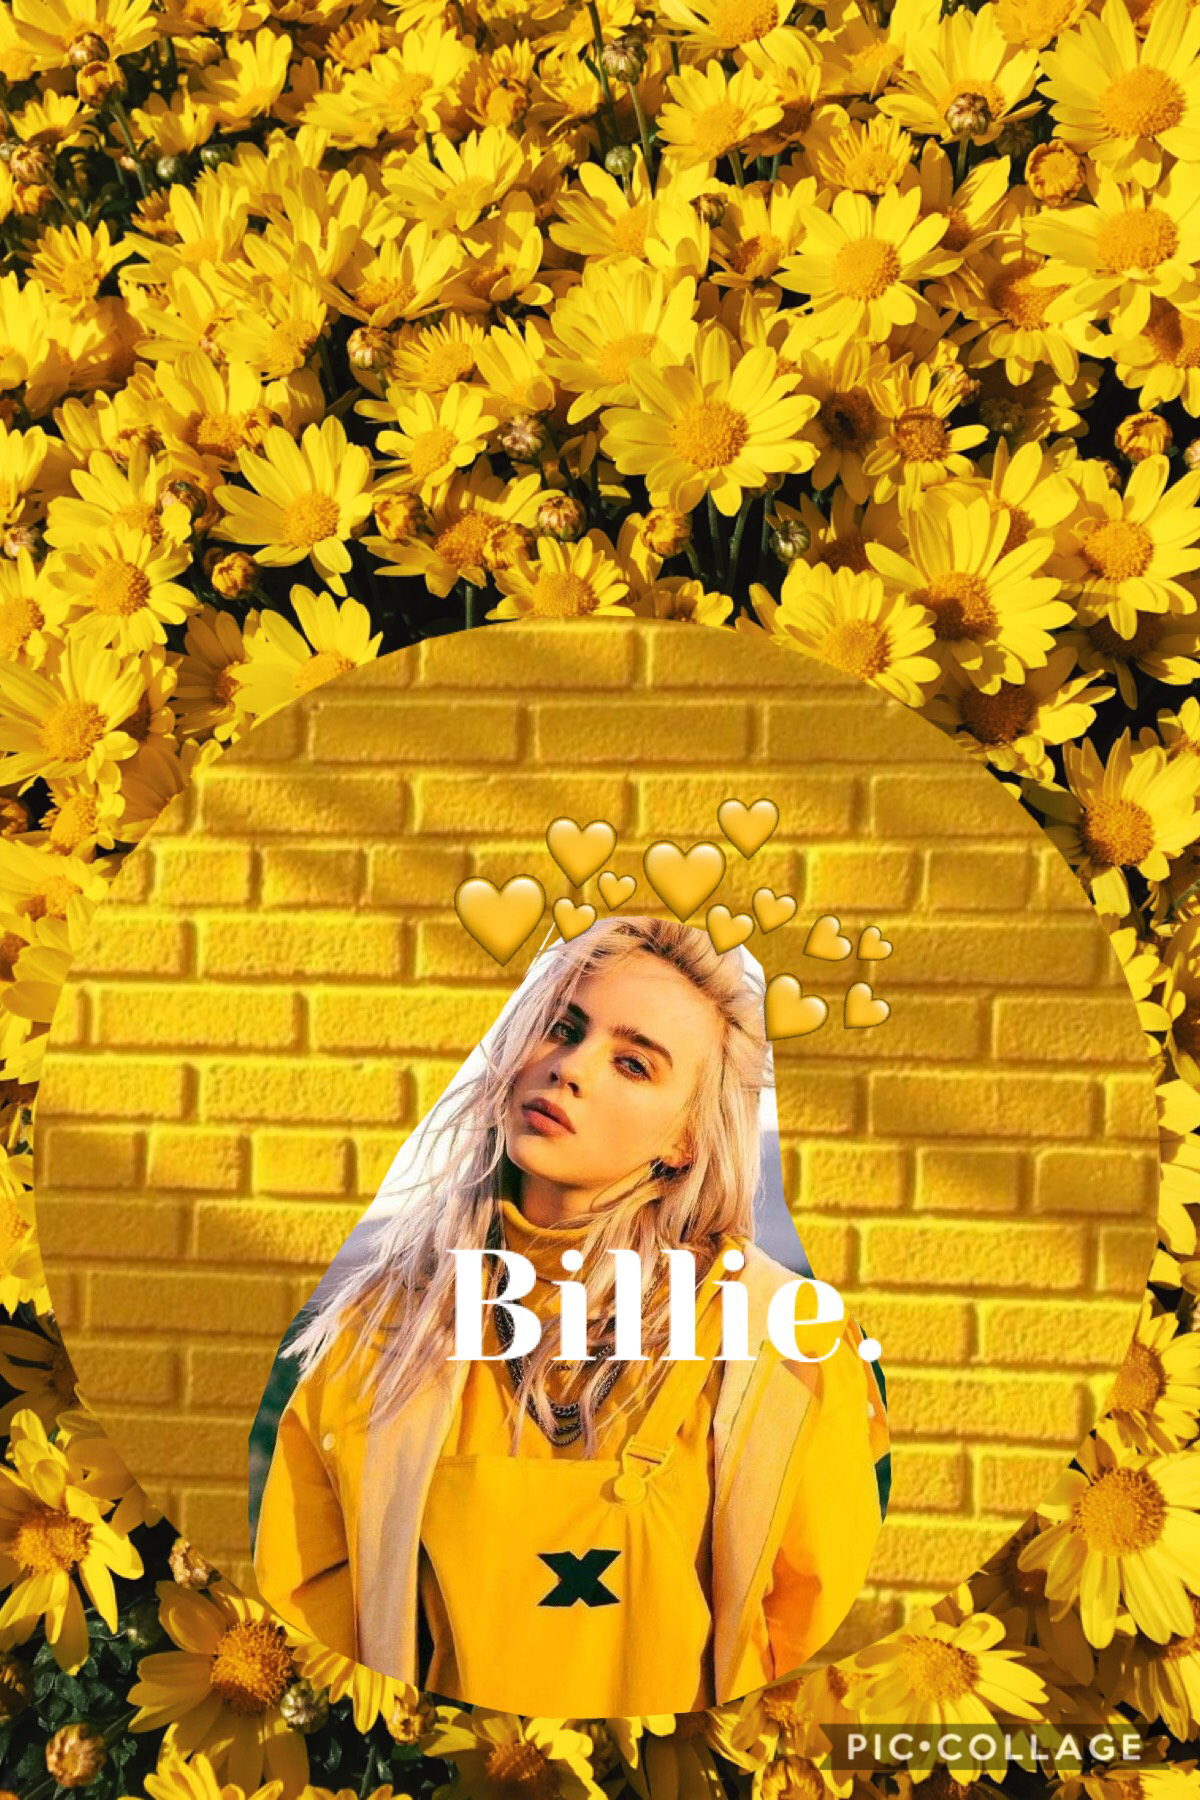 I actually rlly hate Billie Eilish XD don’t hate on me